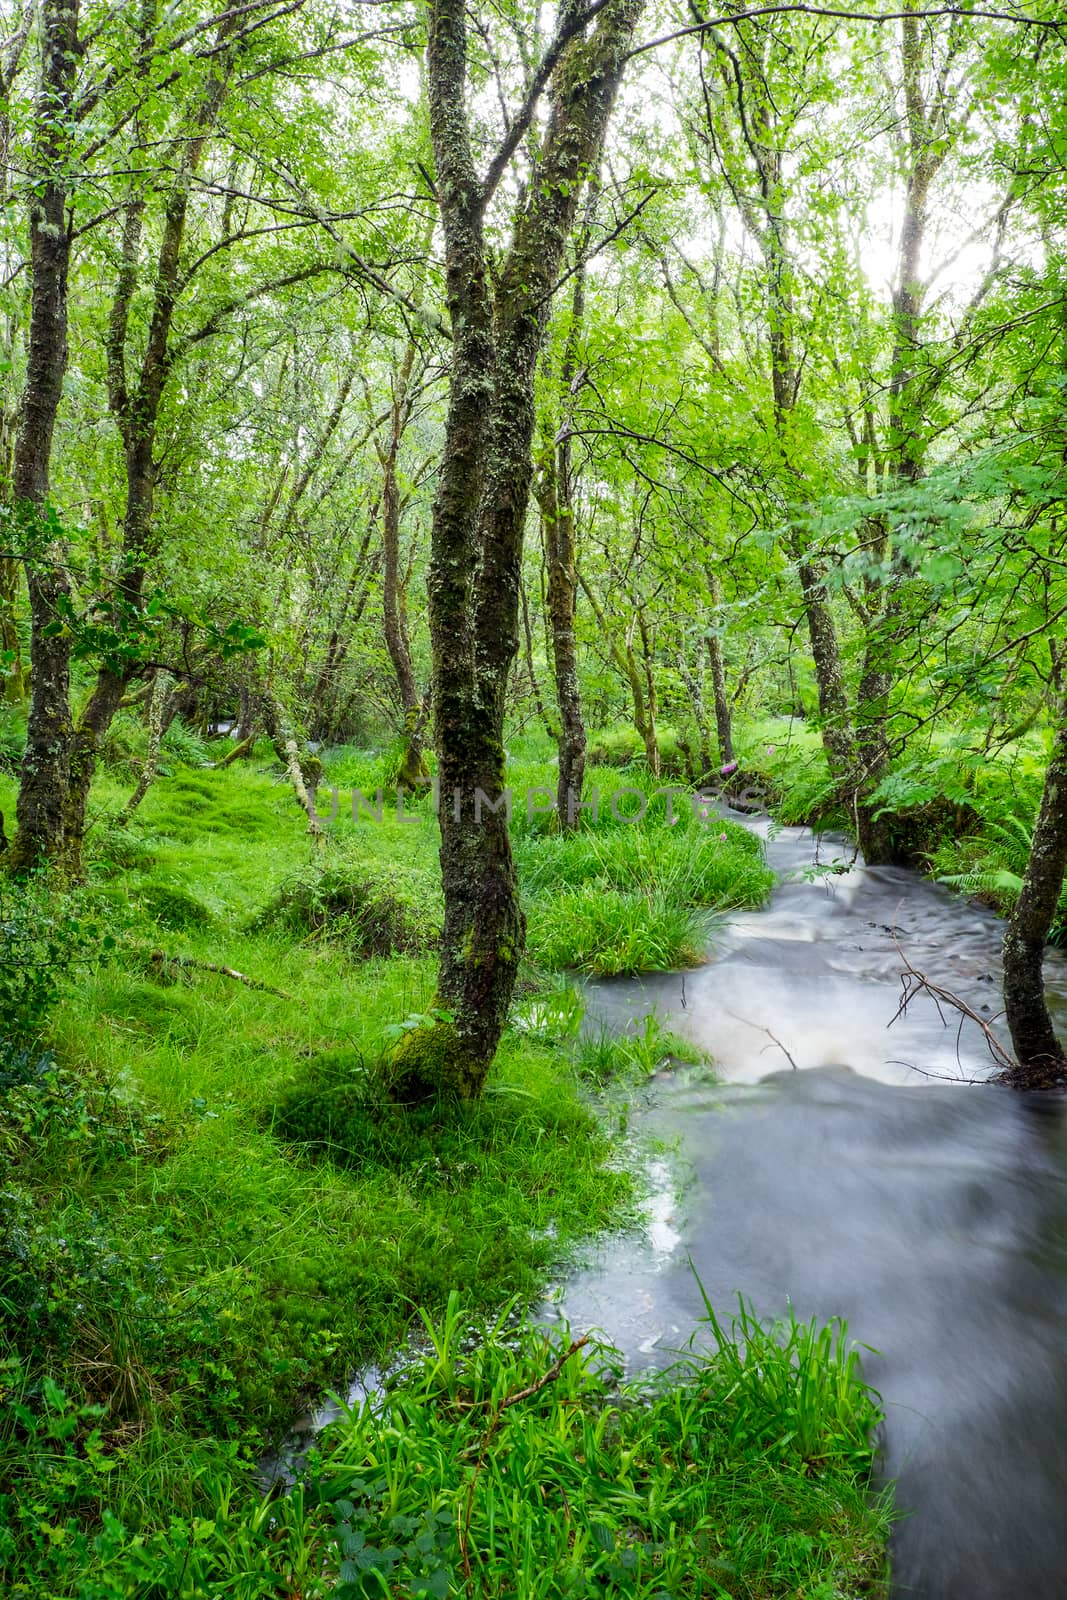 Small creek in a green forest seen in the Highlands of Scotland